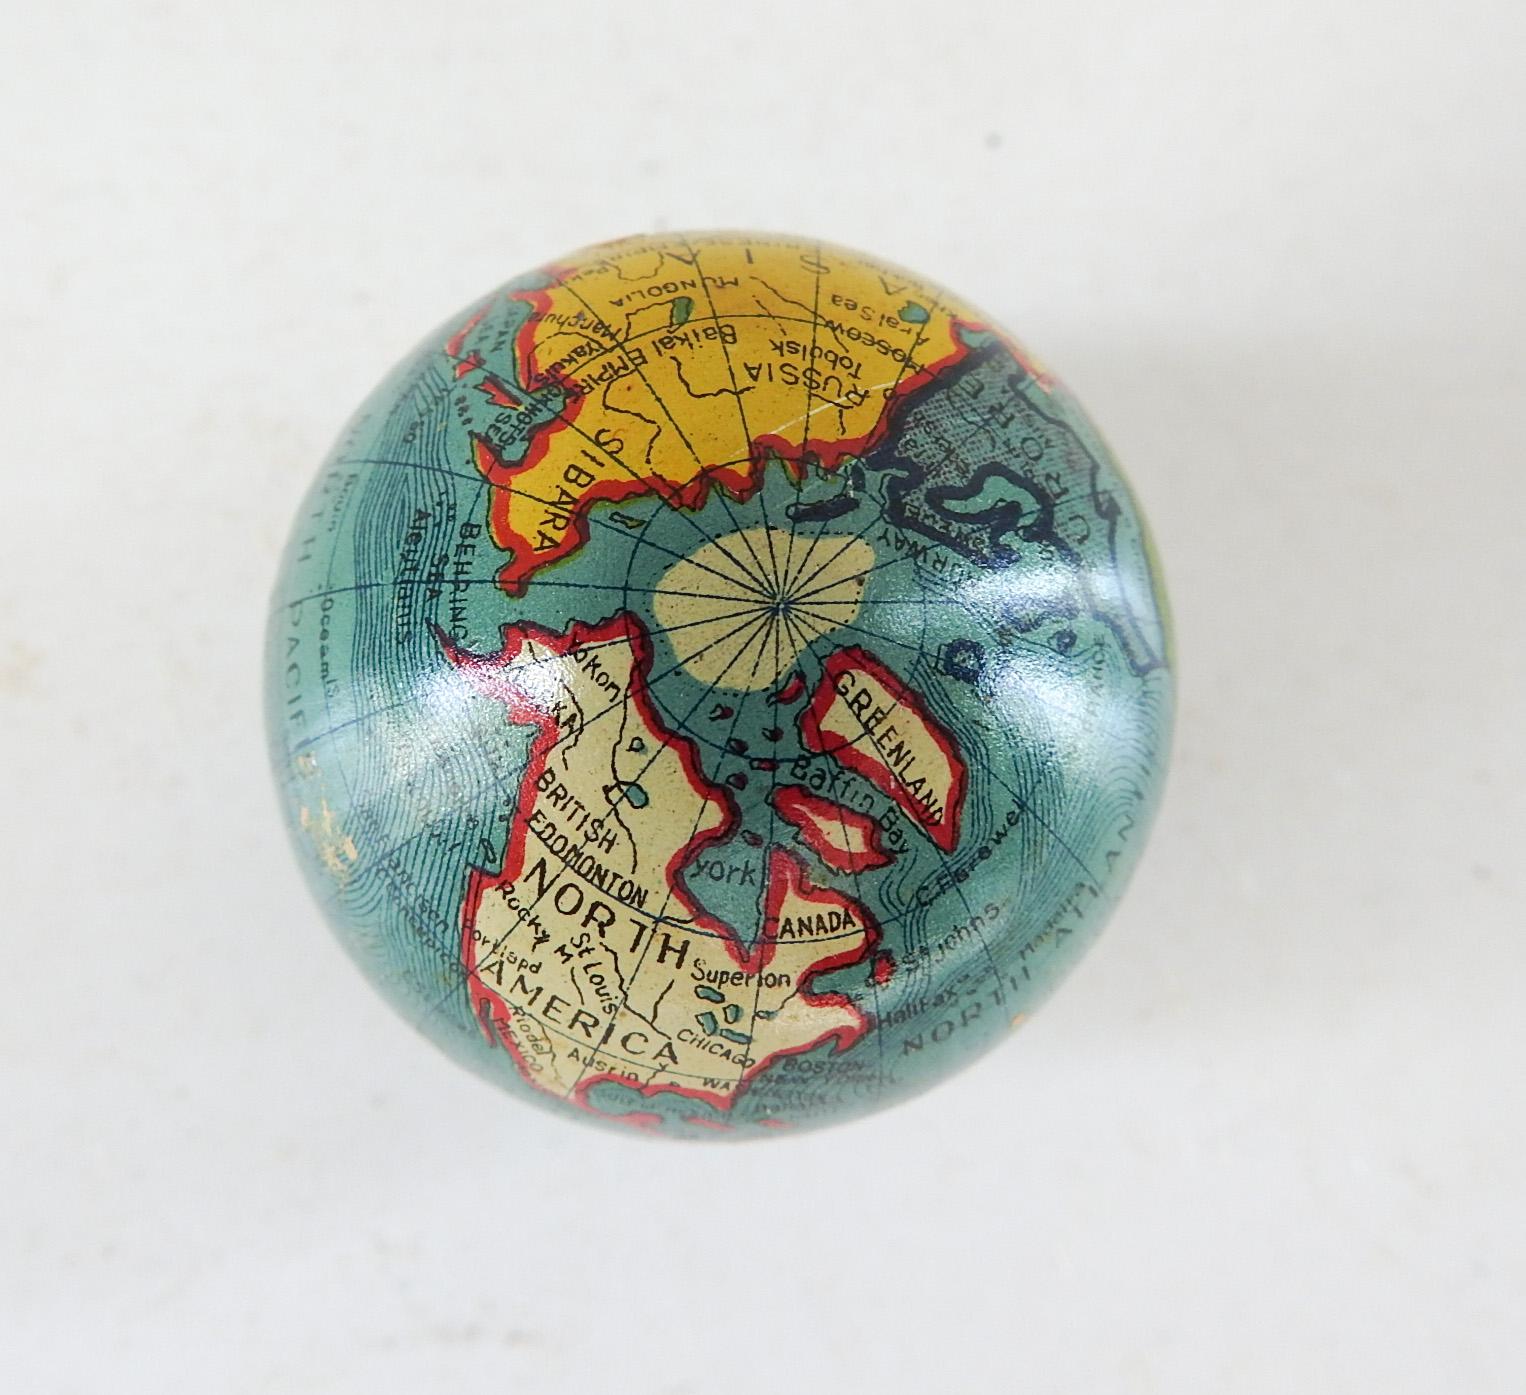 Circa 1930's lithographed small pencil sharpener in the shape of a world globe. New old stock, have several of these, slight color variations, surface scratches.